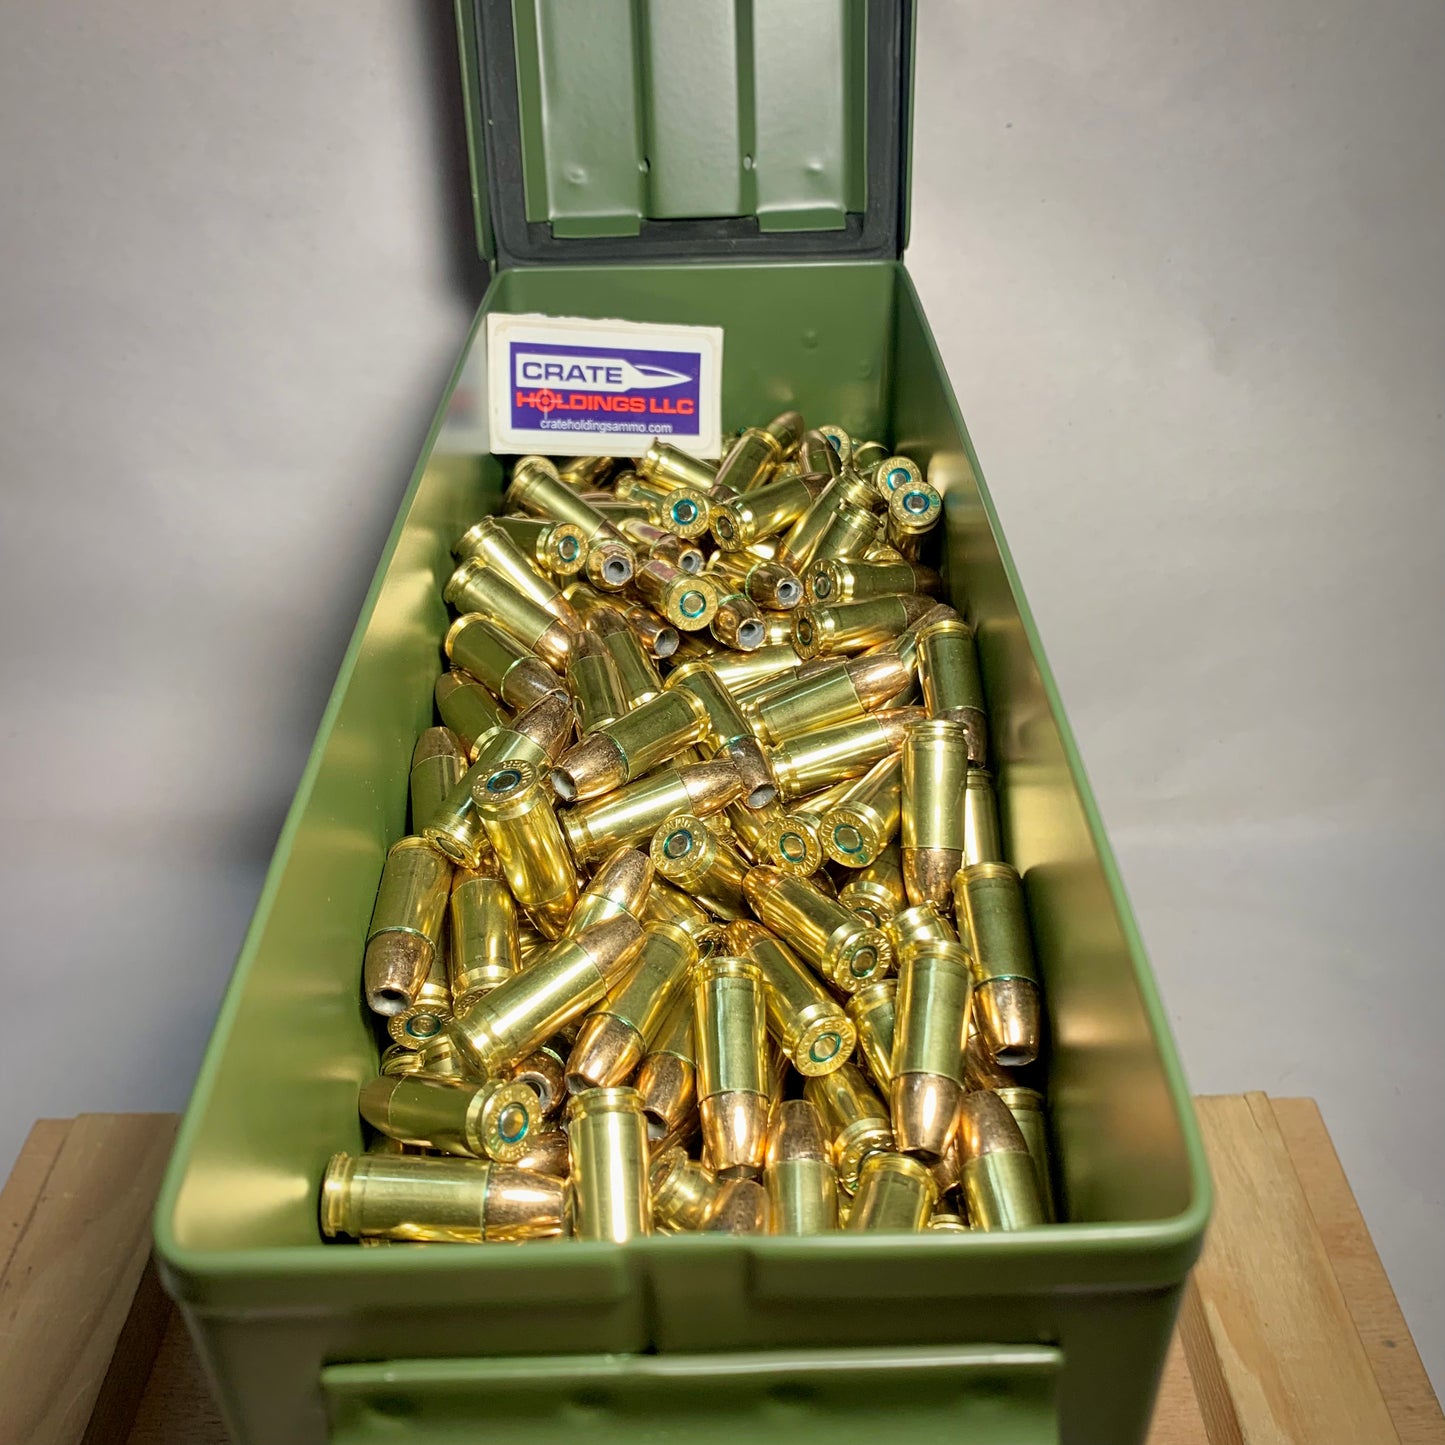 Free Shipping 1000 Round Can Federal Classic Hi-Shok 9mm Luger Ammo 147gr JHP - Loose Pack in New M19A1 Can - 9MS